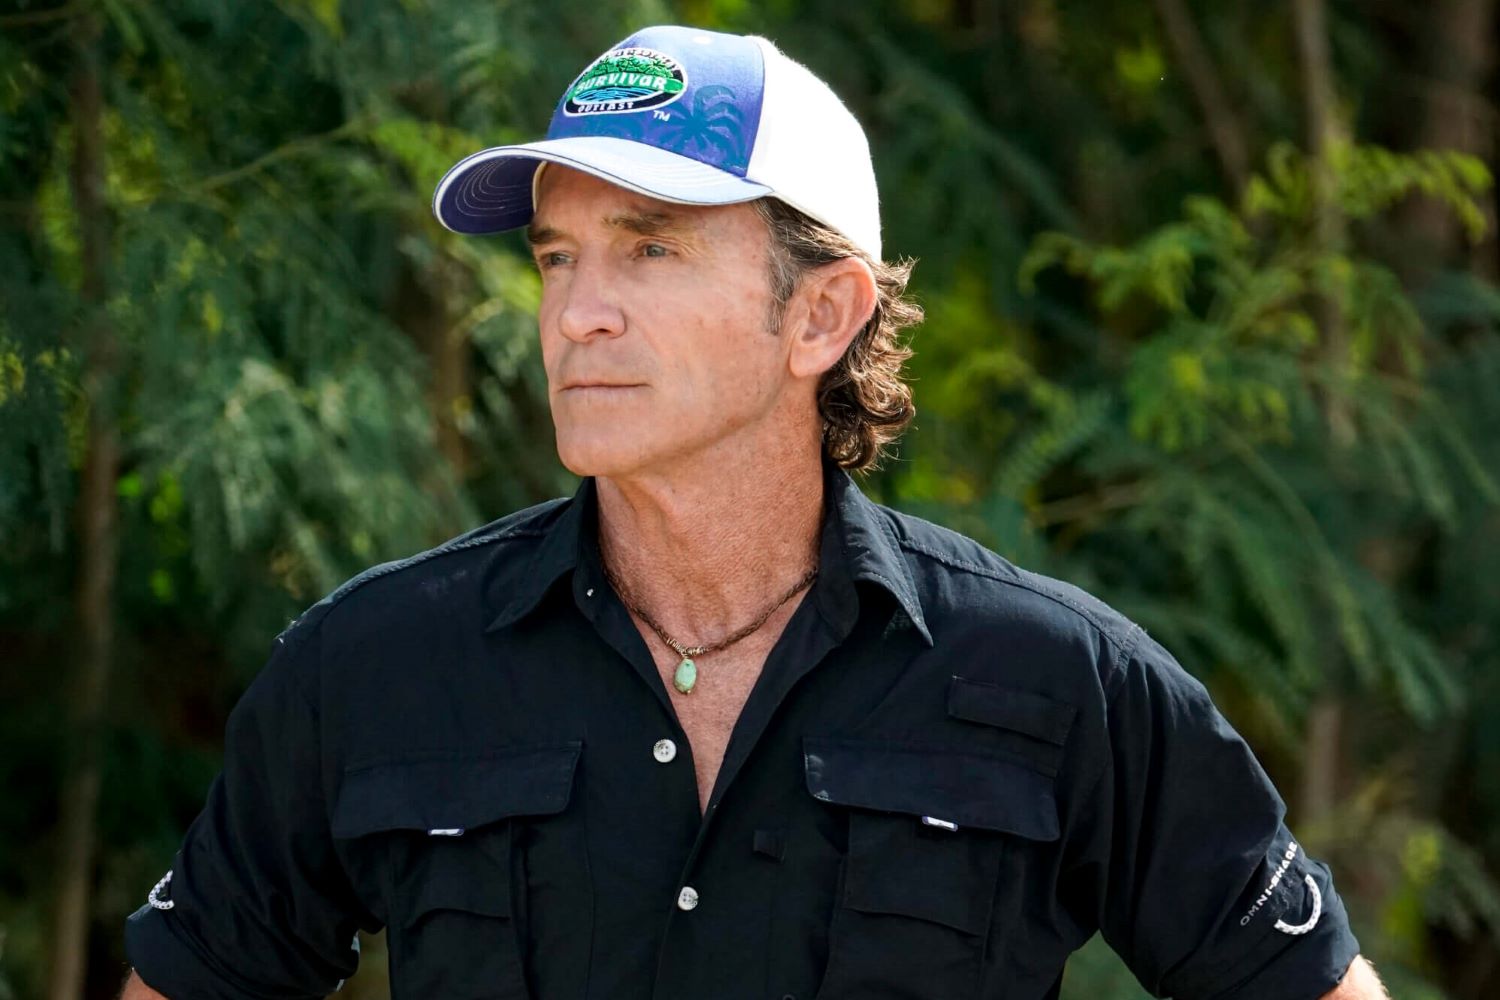 Jeff Probst, the host and executive producer of 'Survivor' who helps come up with the show's rules, wears a black safari shirt and white and blue 'Survivor' baseball cap.